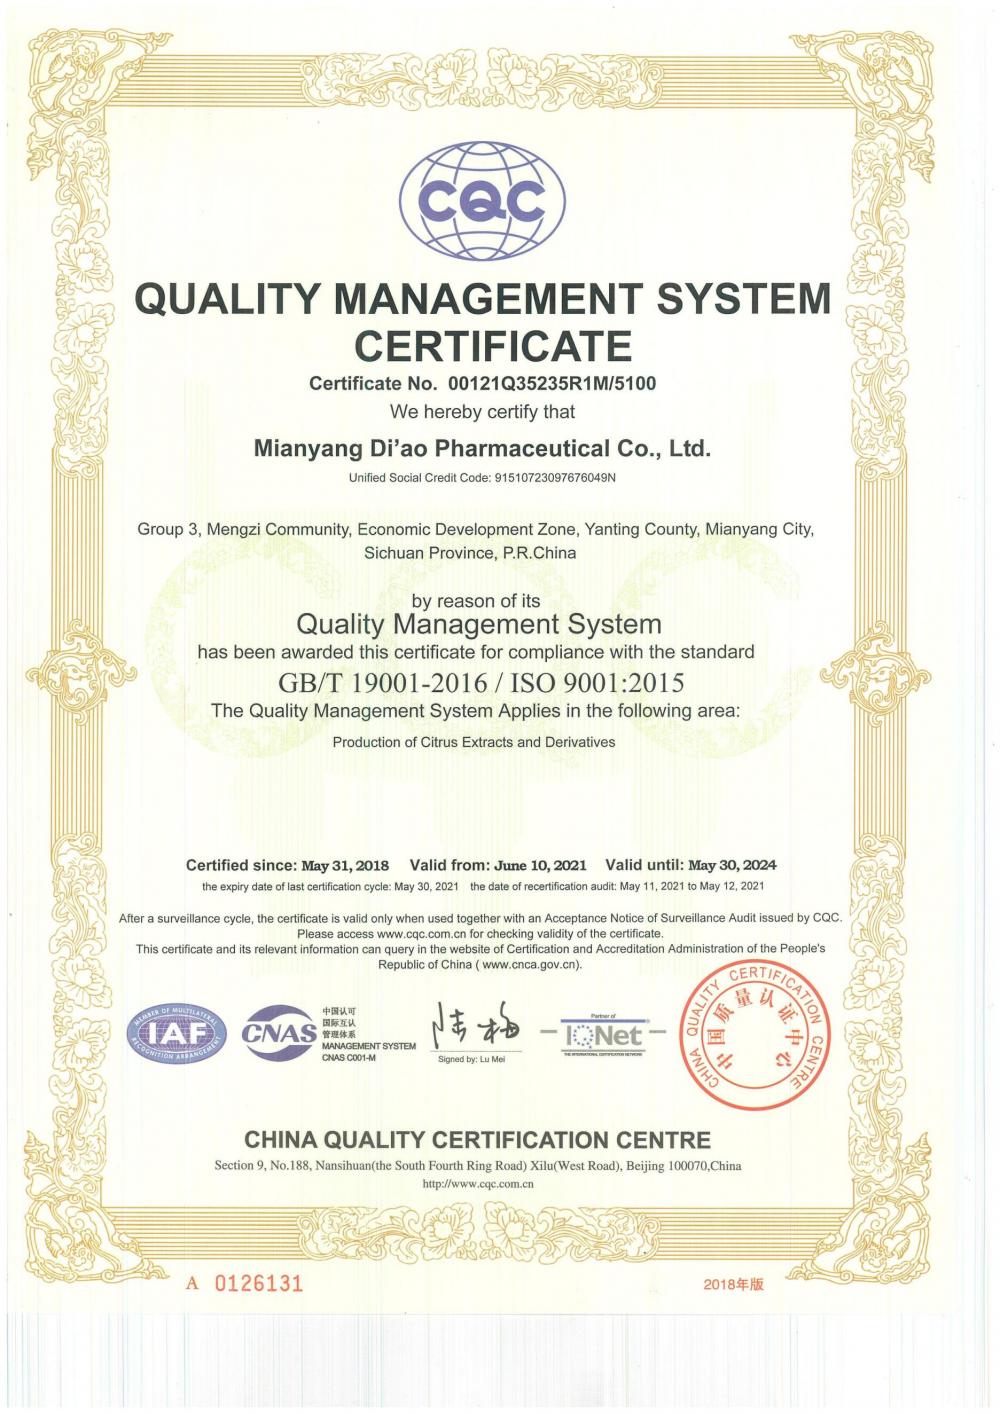 QUALITY MANAGEMENTt SYSTEM CERTIFICATE